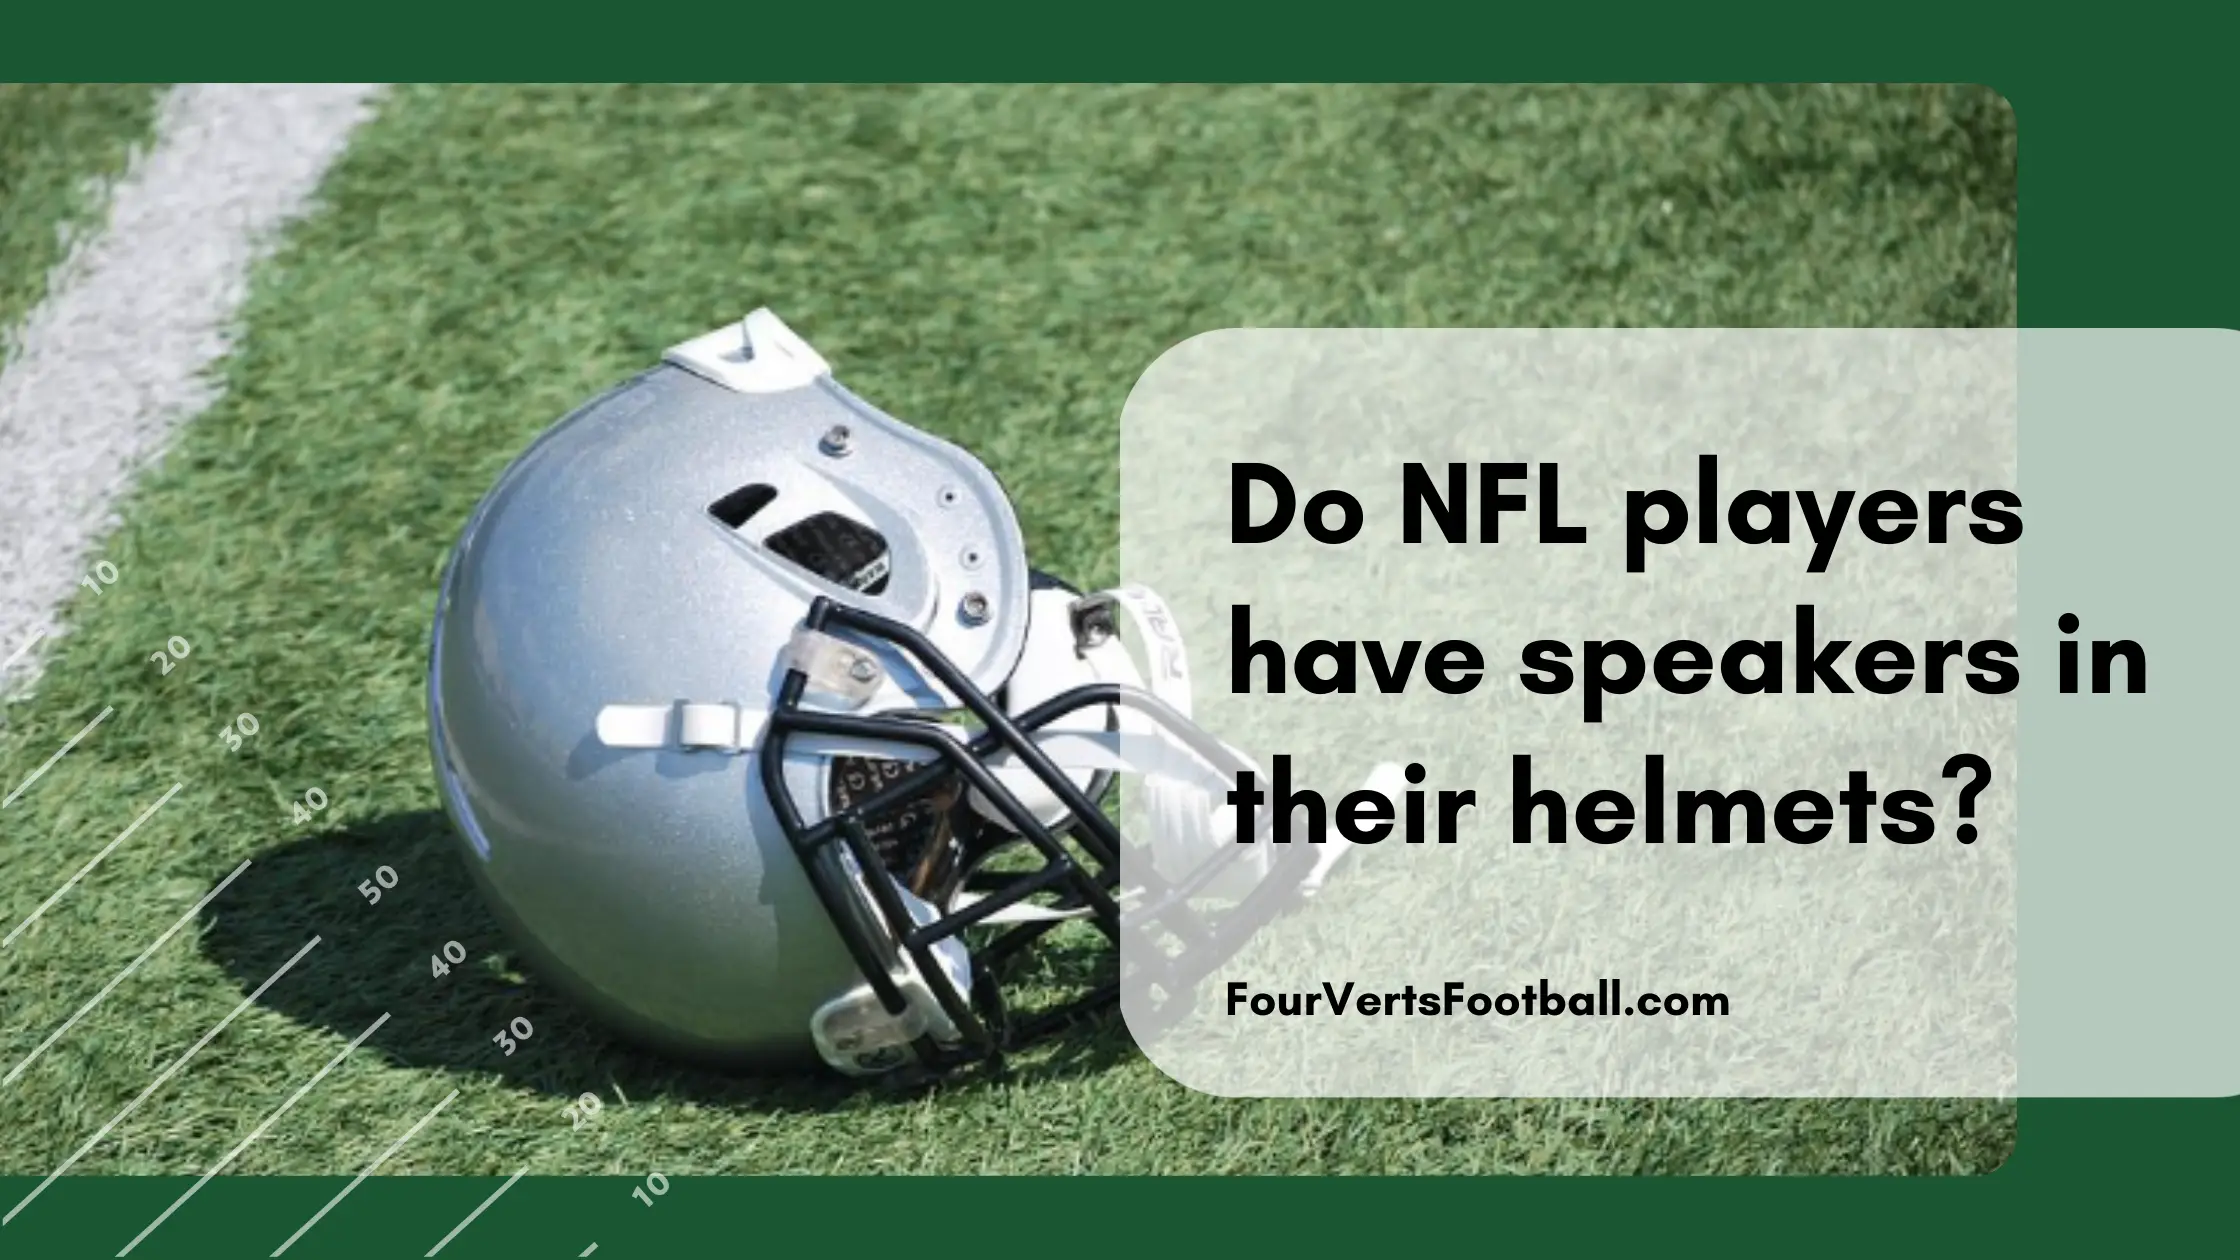 Do NFL players have speakers in their helmets?